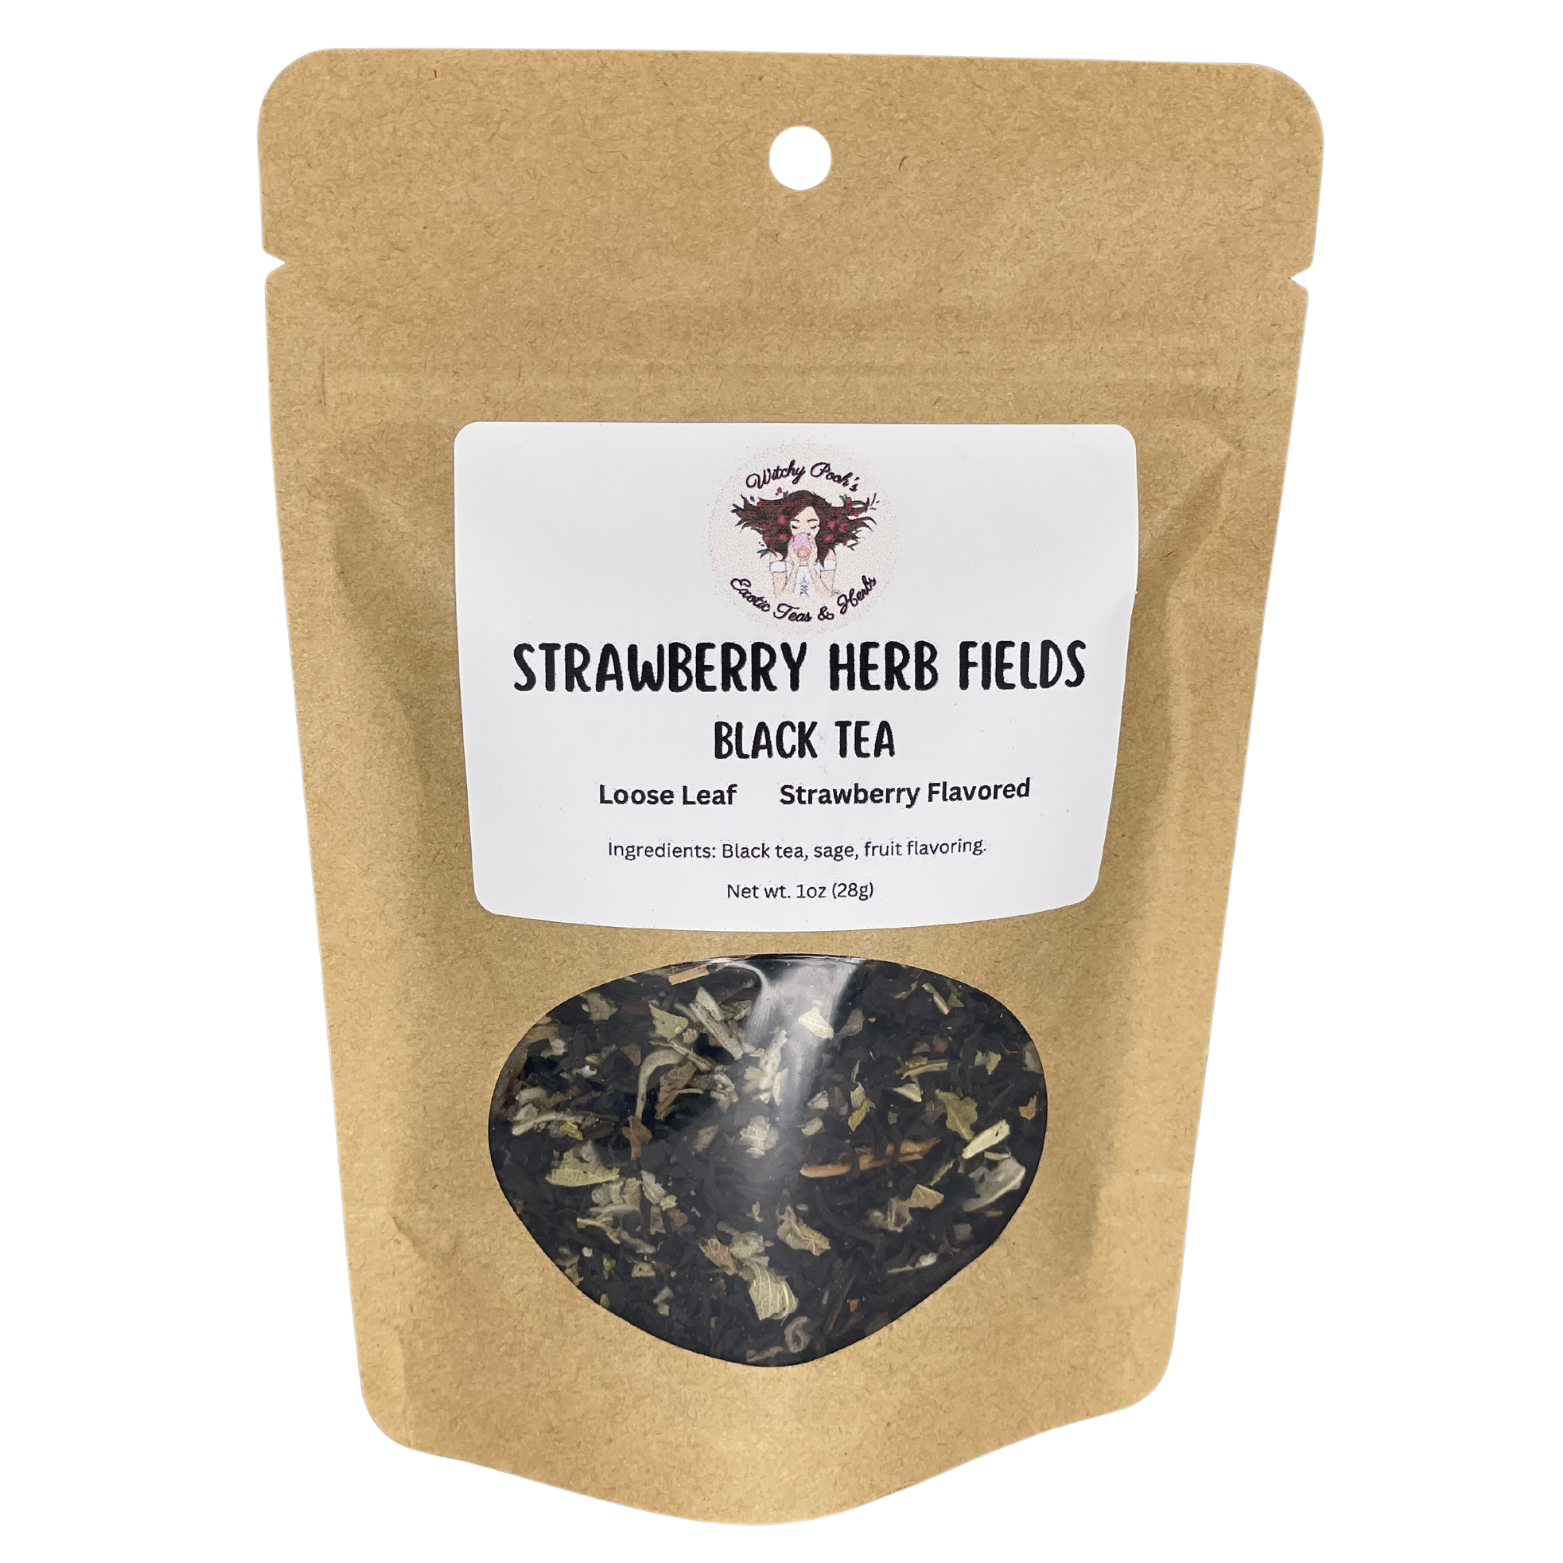 Witchy Pooh's Strawberry Herb Fields Strawberry Flavored Black Loose Leaf Tea with Sage Leaf-3